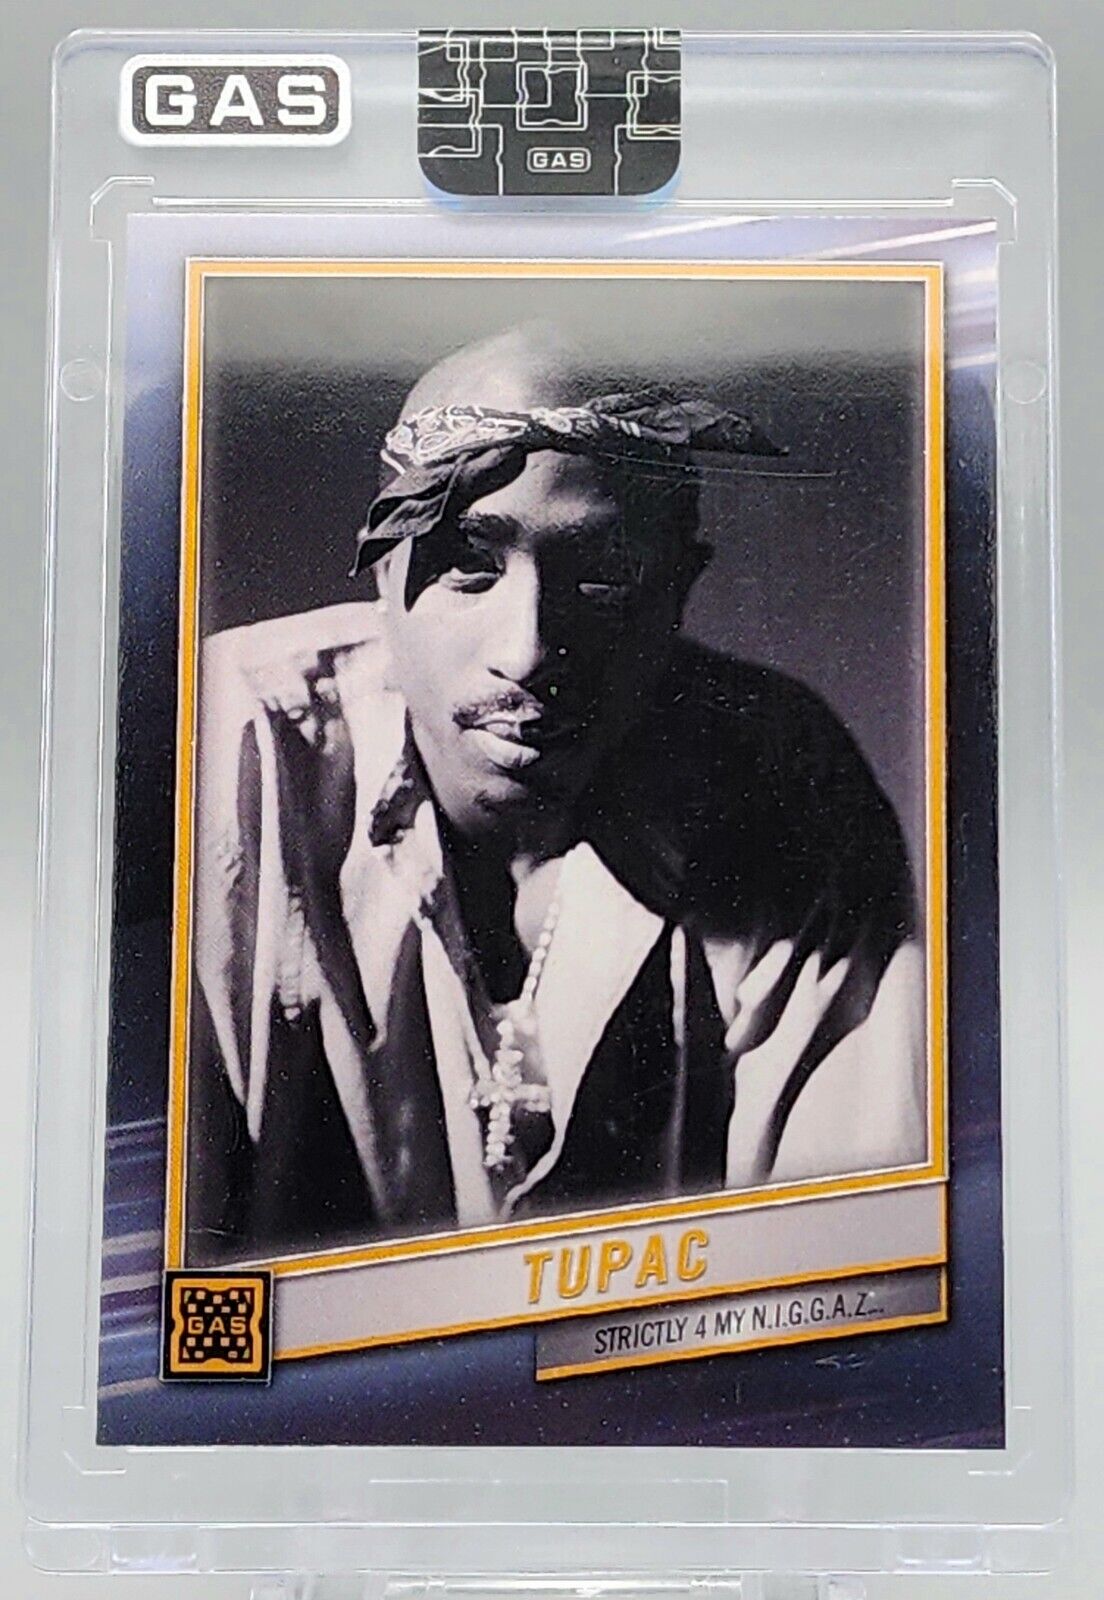 2023 Gas Trading Cards Tupac Shakur 2Pac Strictly 4 My Album Card #2